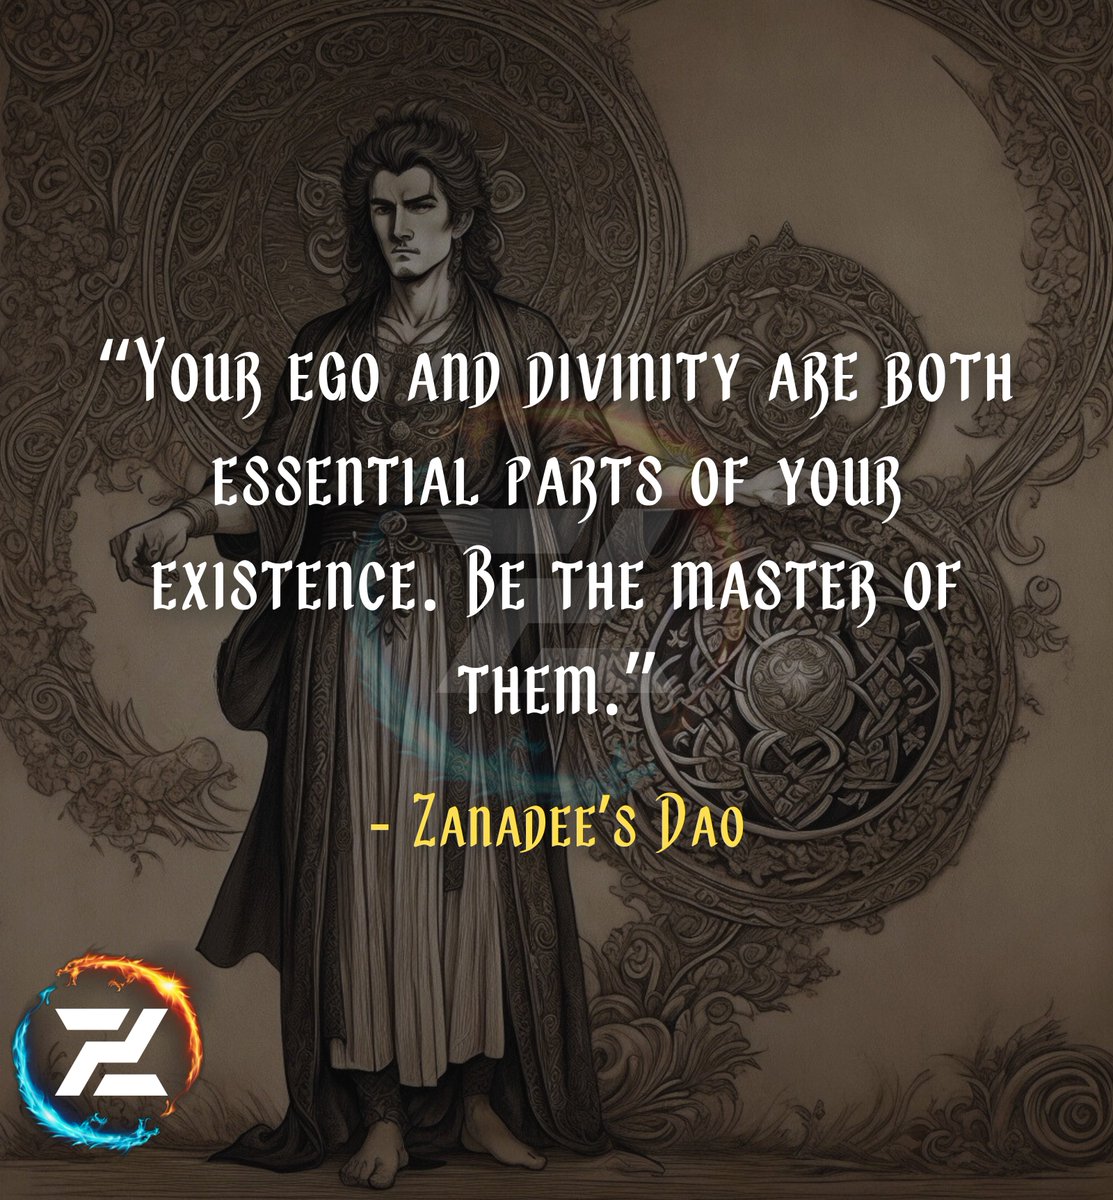 Mastery of Self

“Your ego and divinity are both essential parts of your existence. Be the master of them.”

#MasterYourEgo #SpiritualEssence #BalanceInLife #HarmonyAndPurpose #JourneyToFulfillment 

Zanadee’s Dao